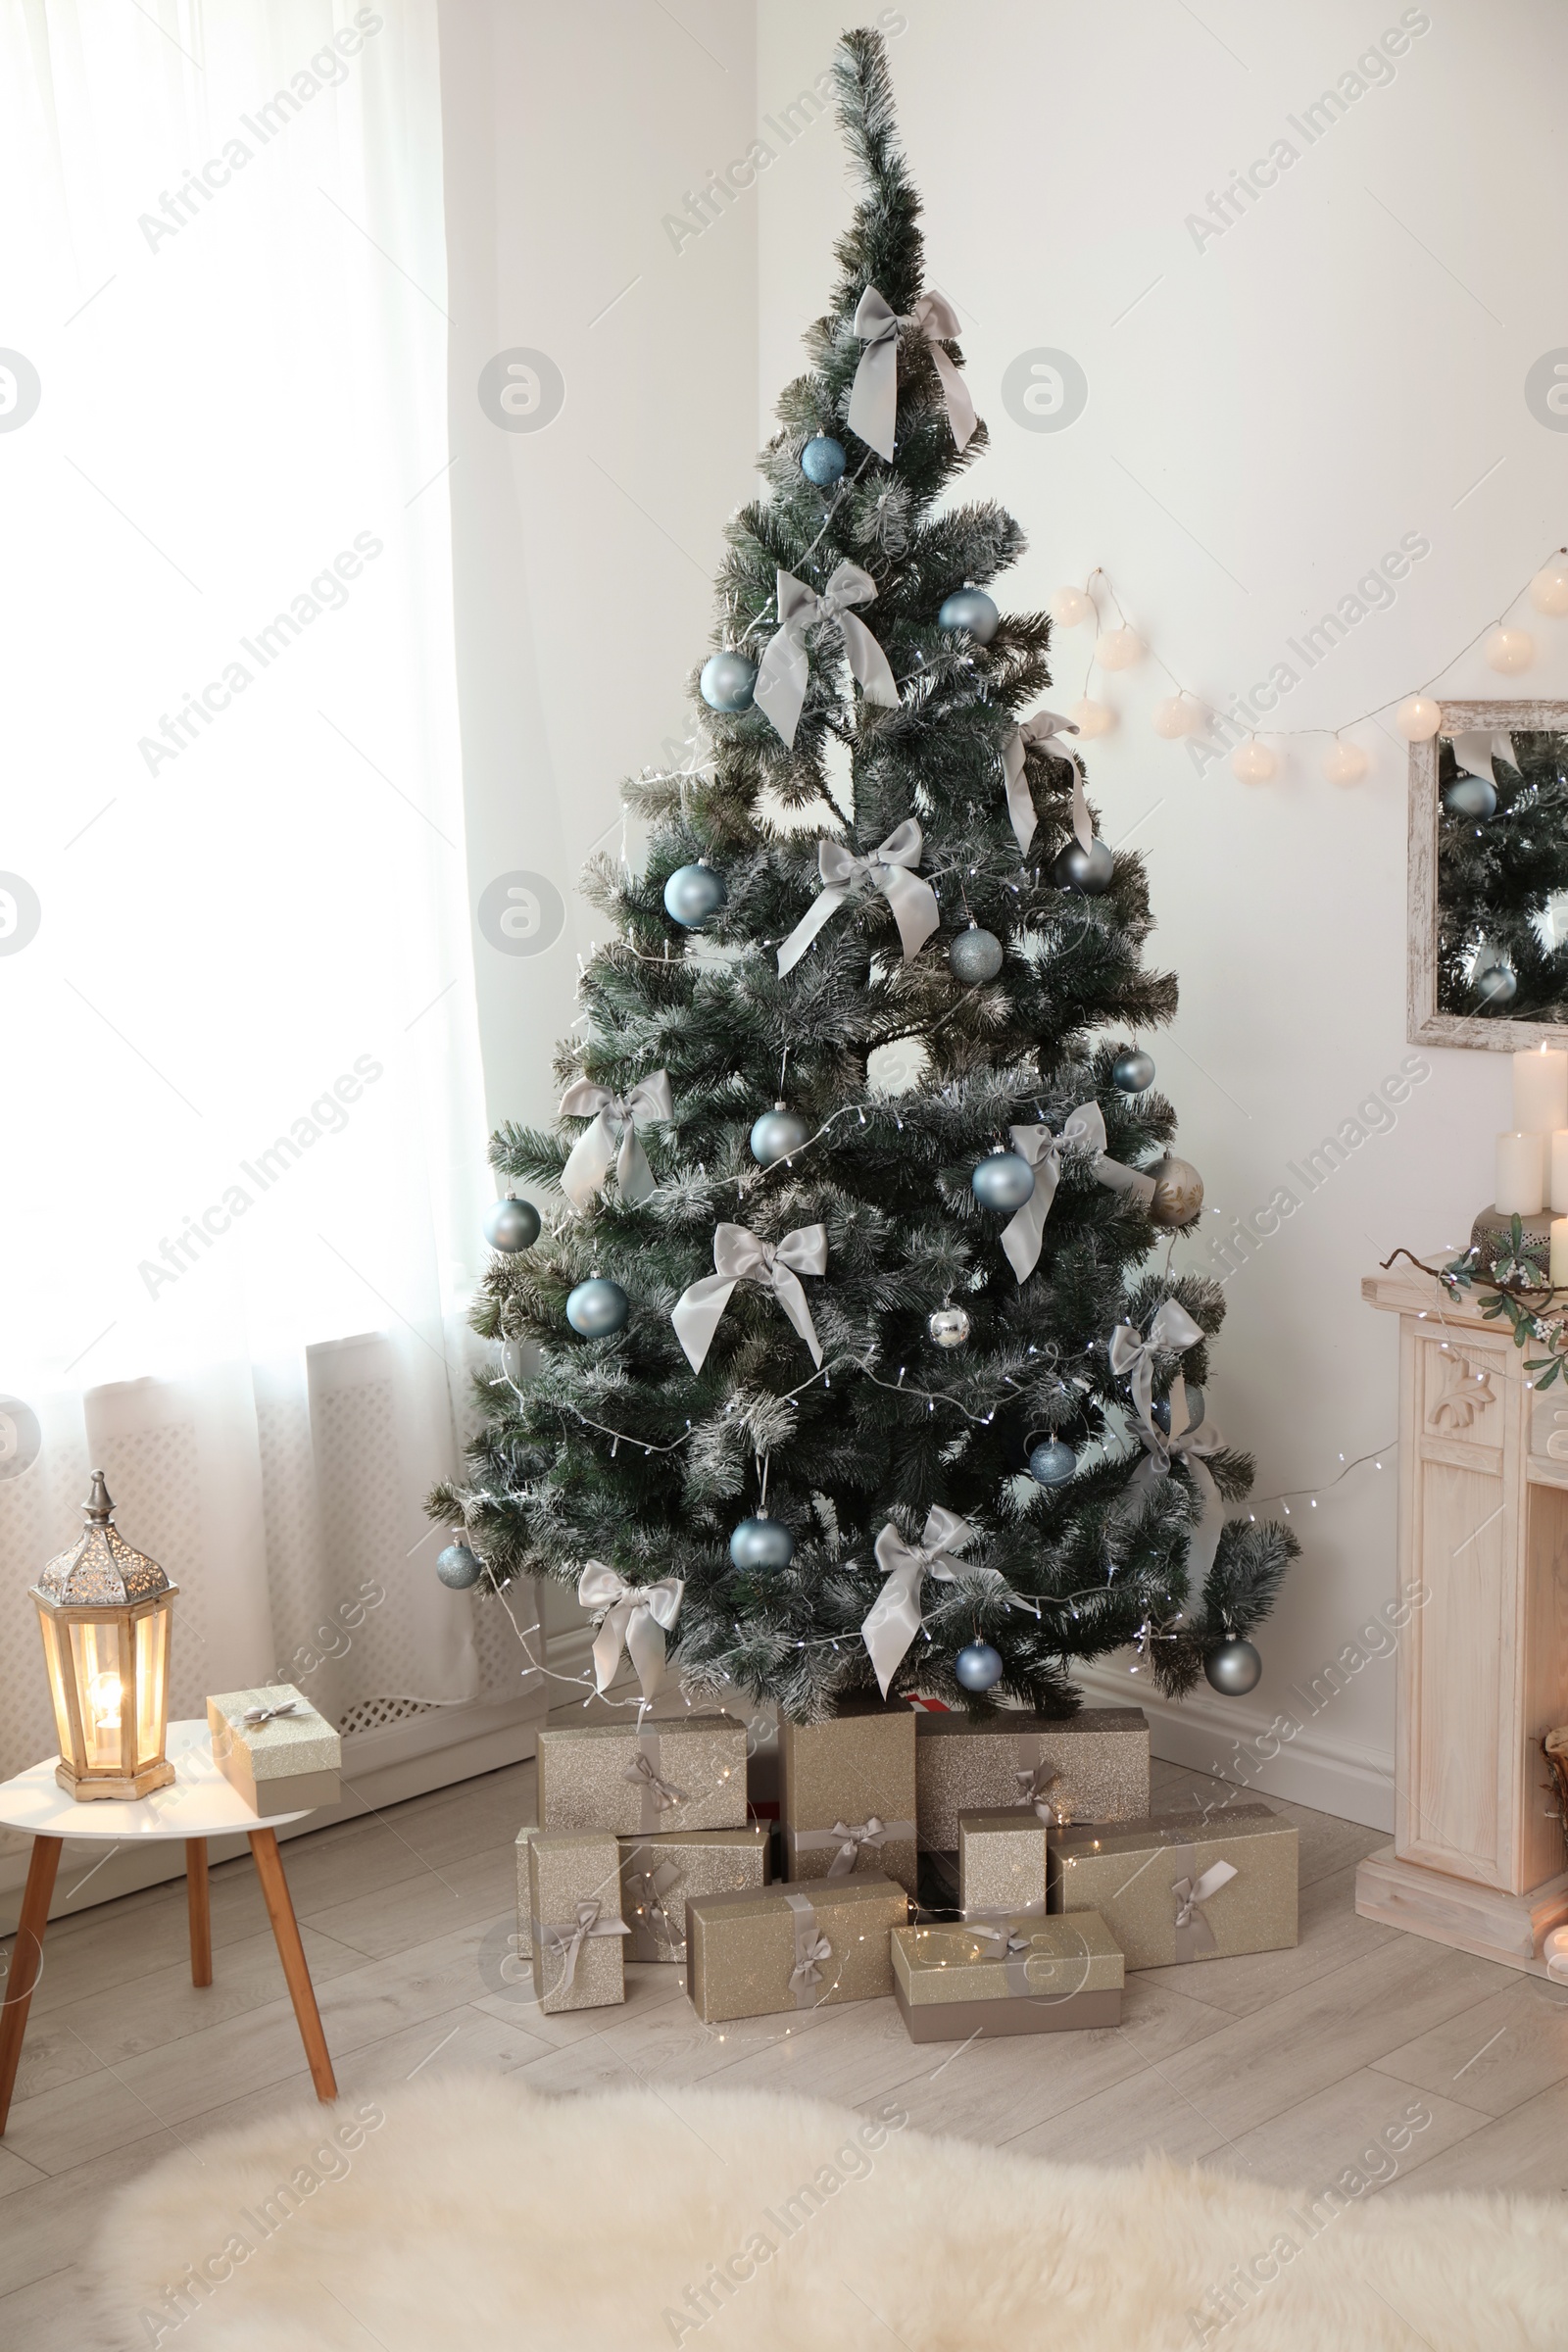 Photo of Decorated Christmas tree with gift boxes and lantern on table in stylish living room interior